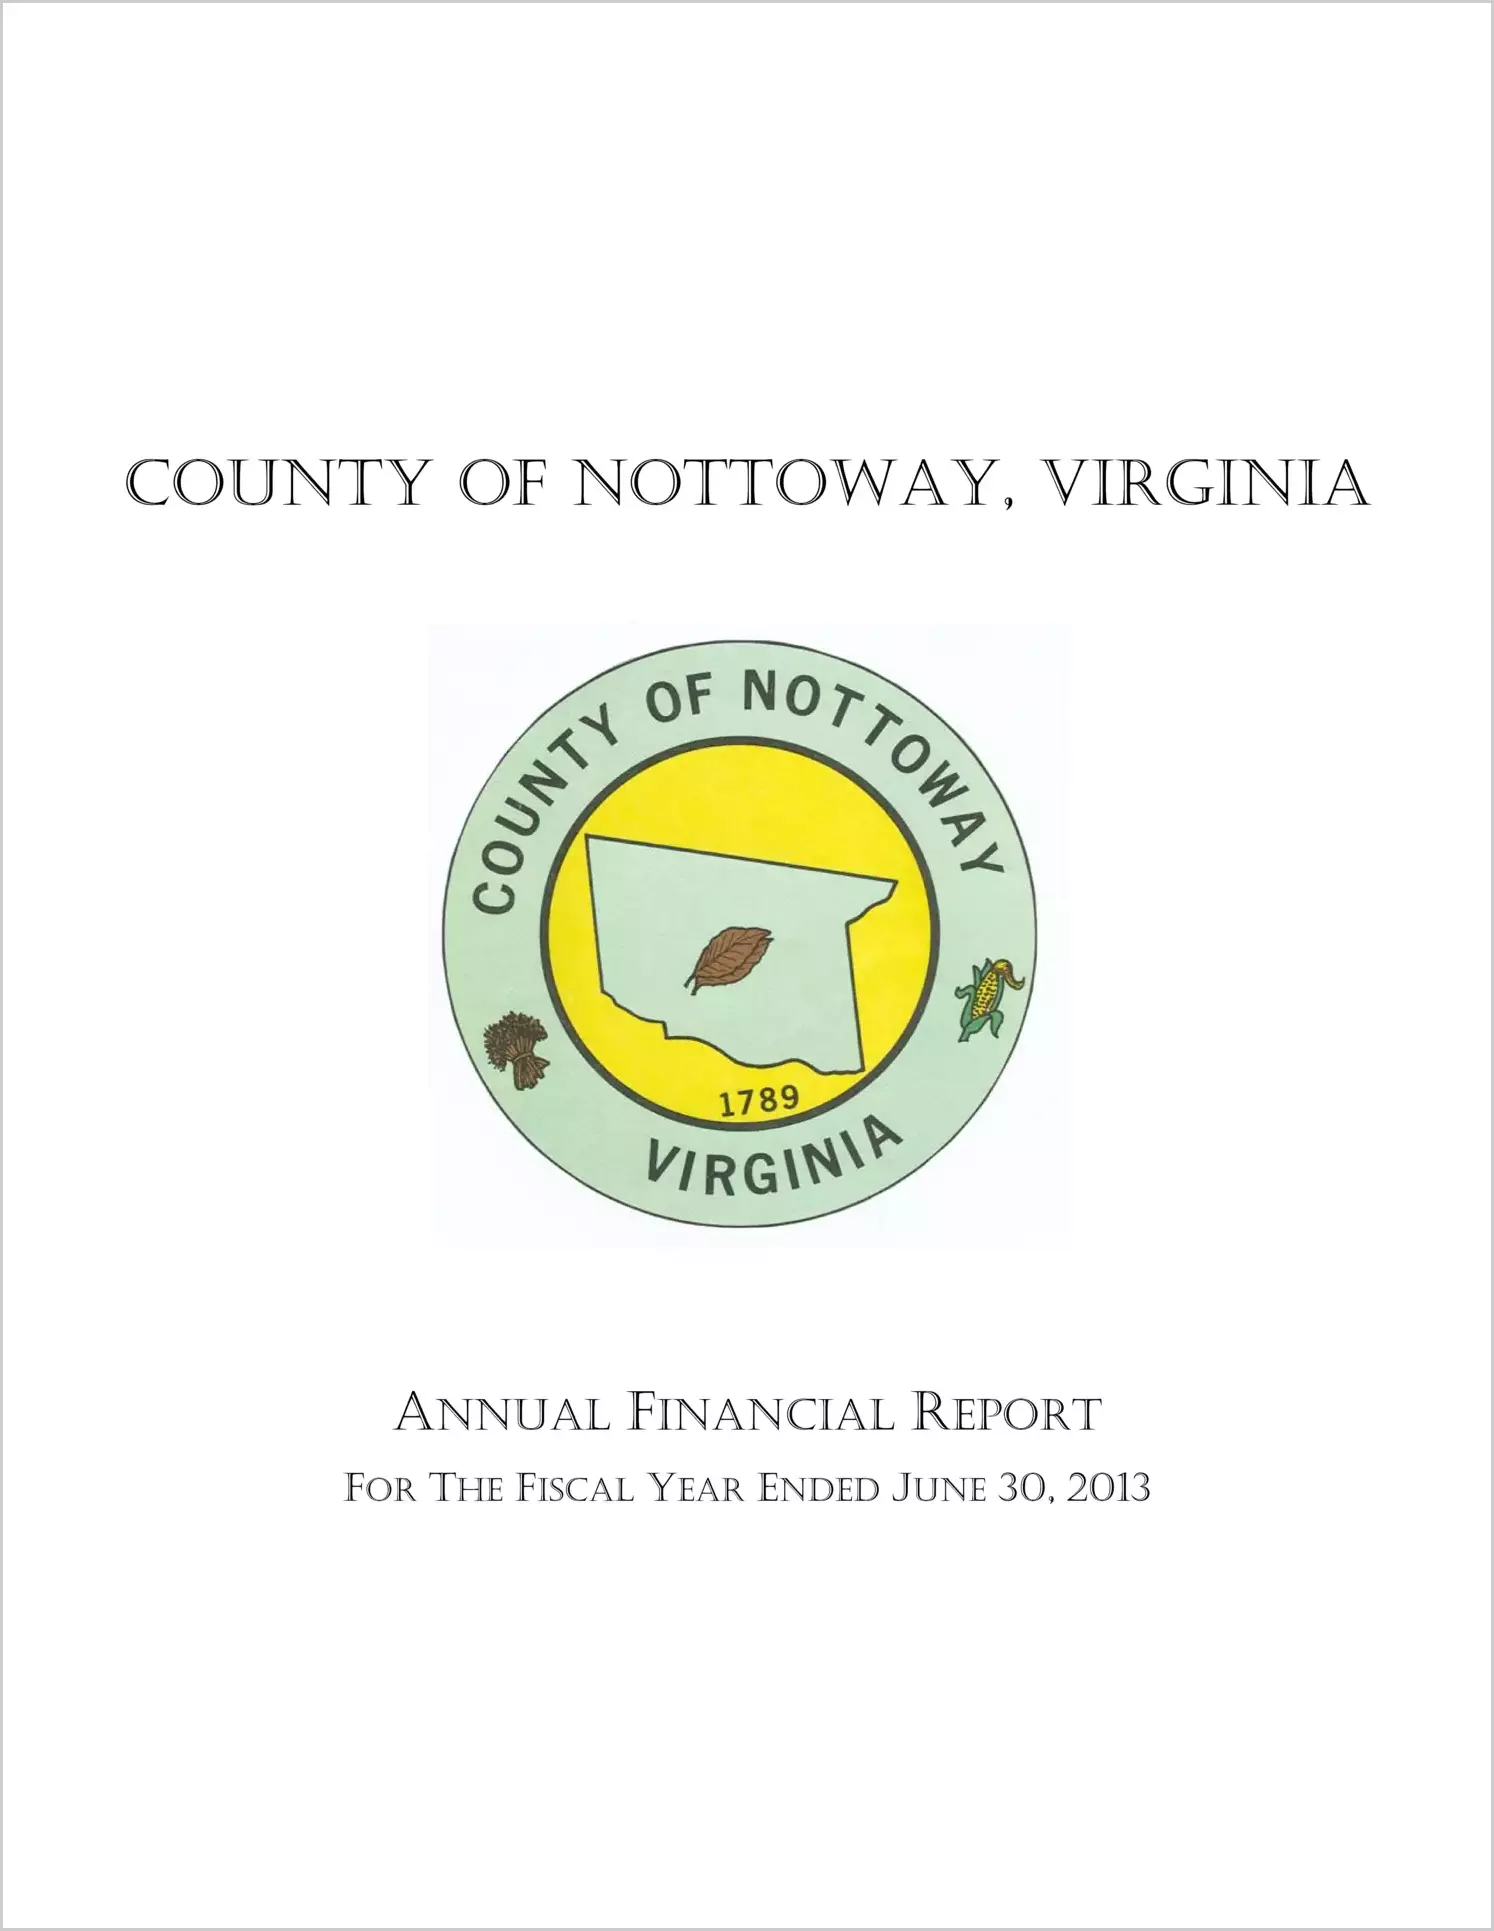 2013 Annual Financial Report for County of Nottoway